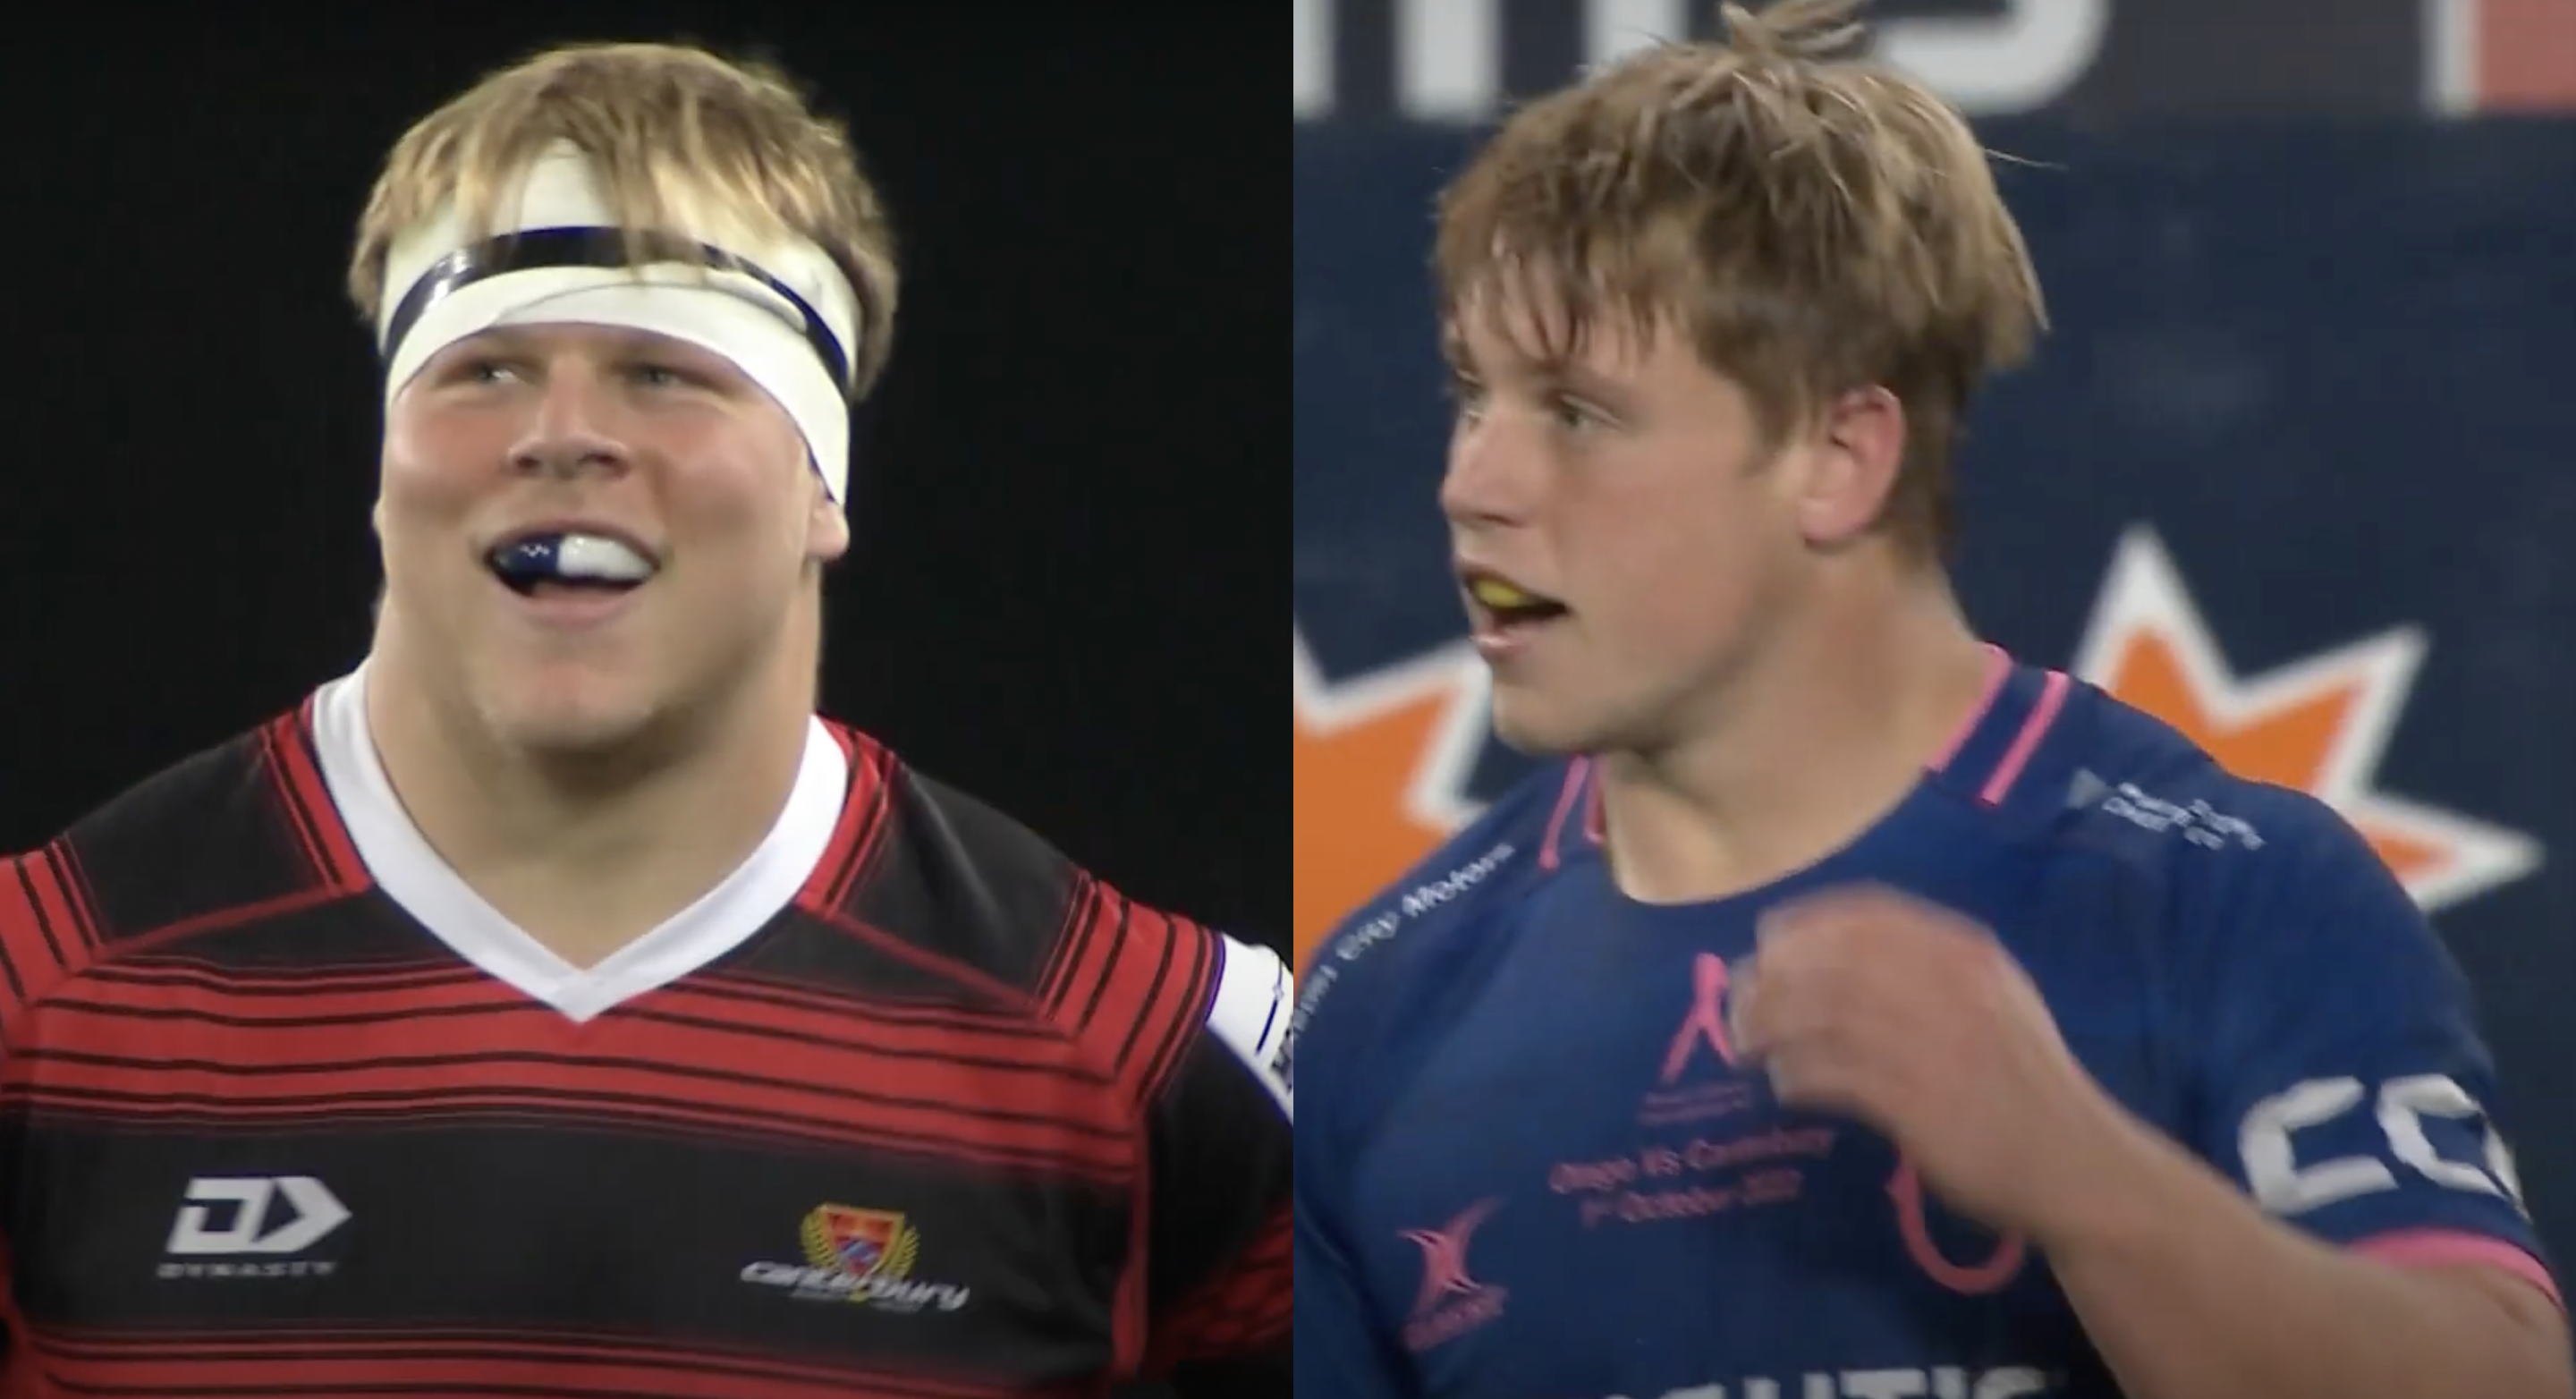 Otago hooker flattens his younger brother